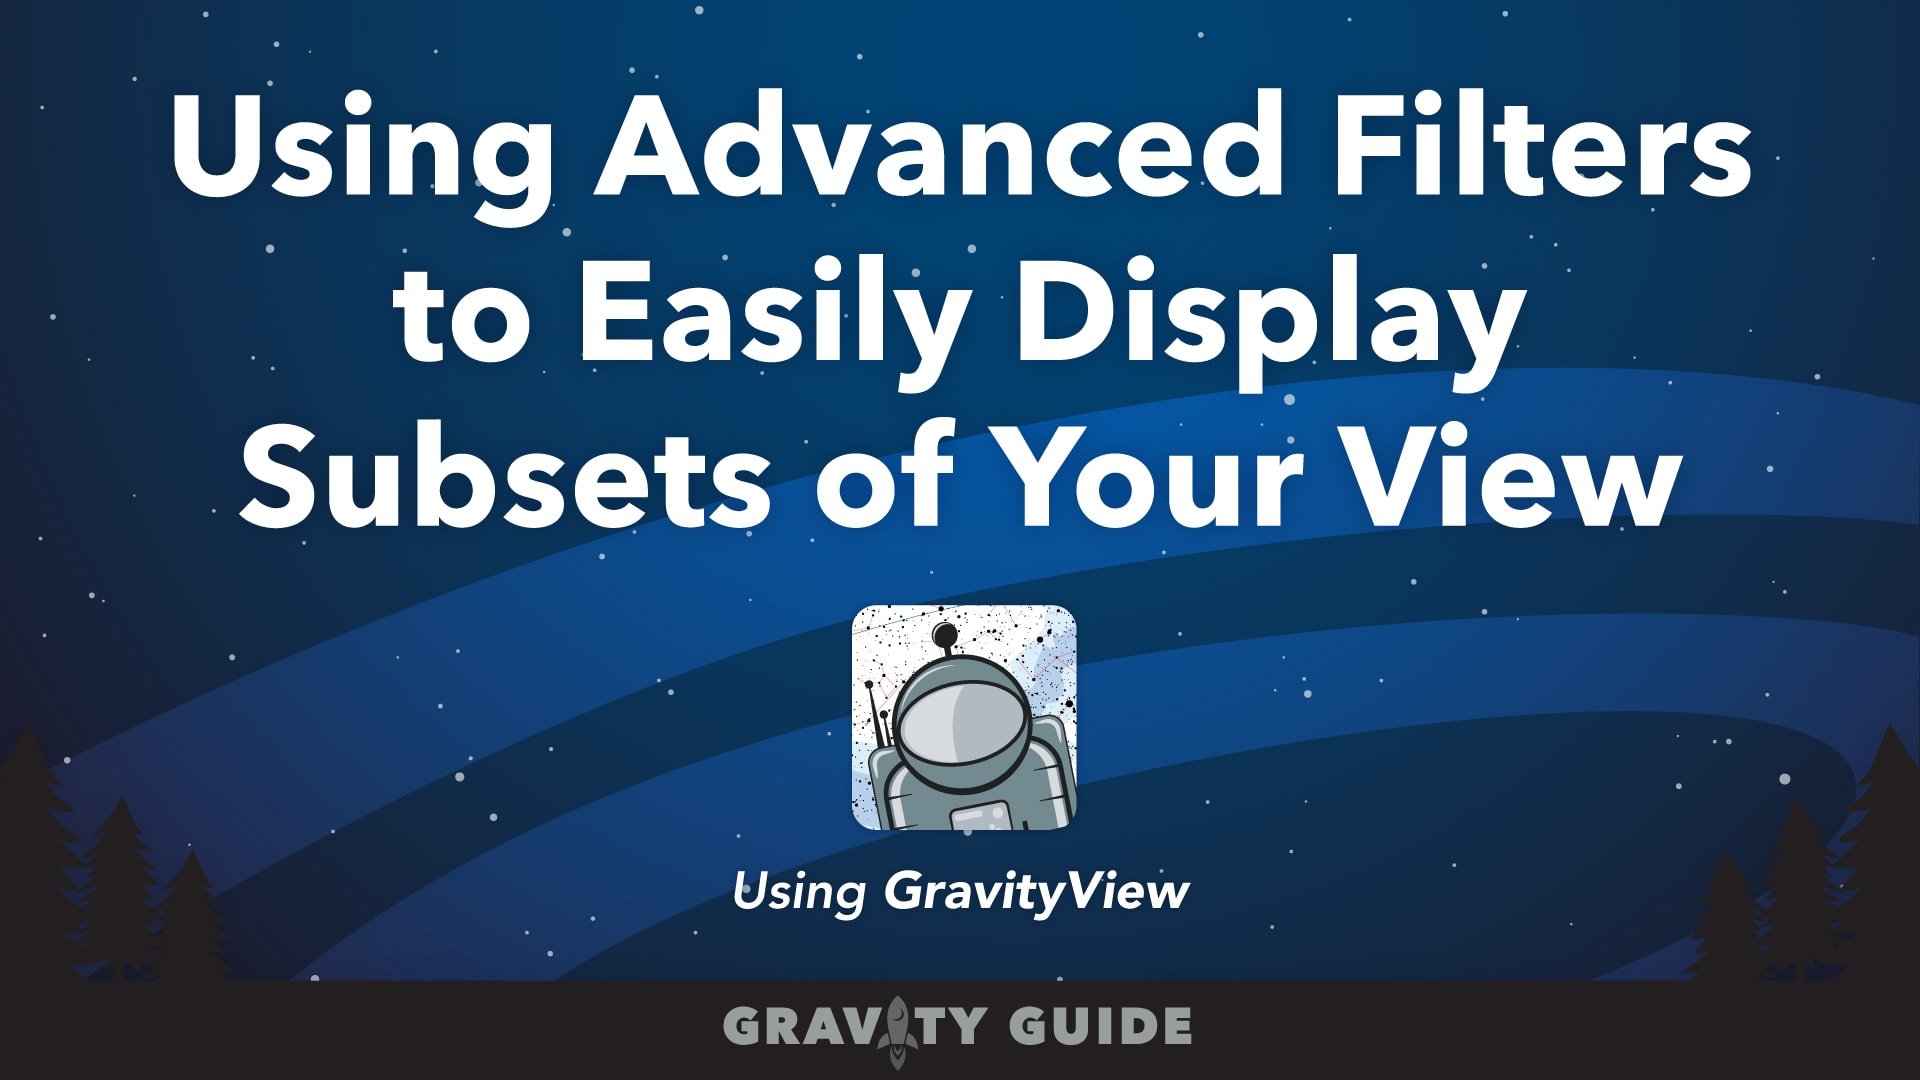 Using GravityView Advanced Filters to Easily Display Subsets of Your View